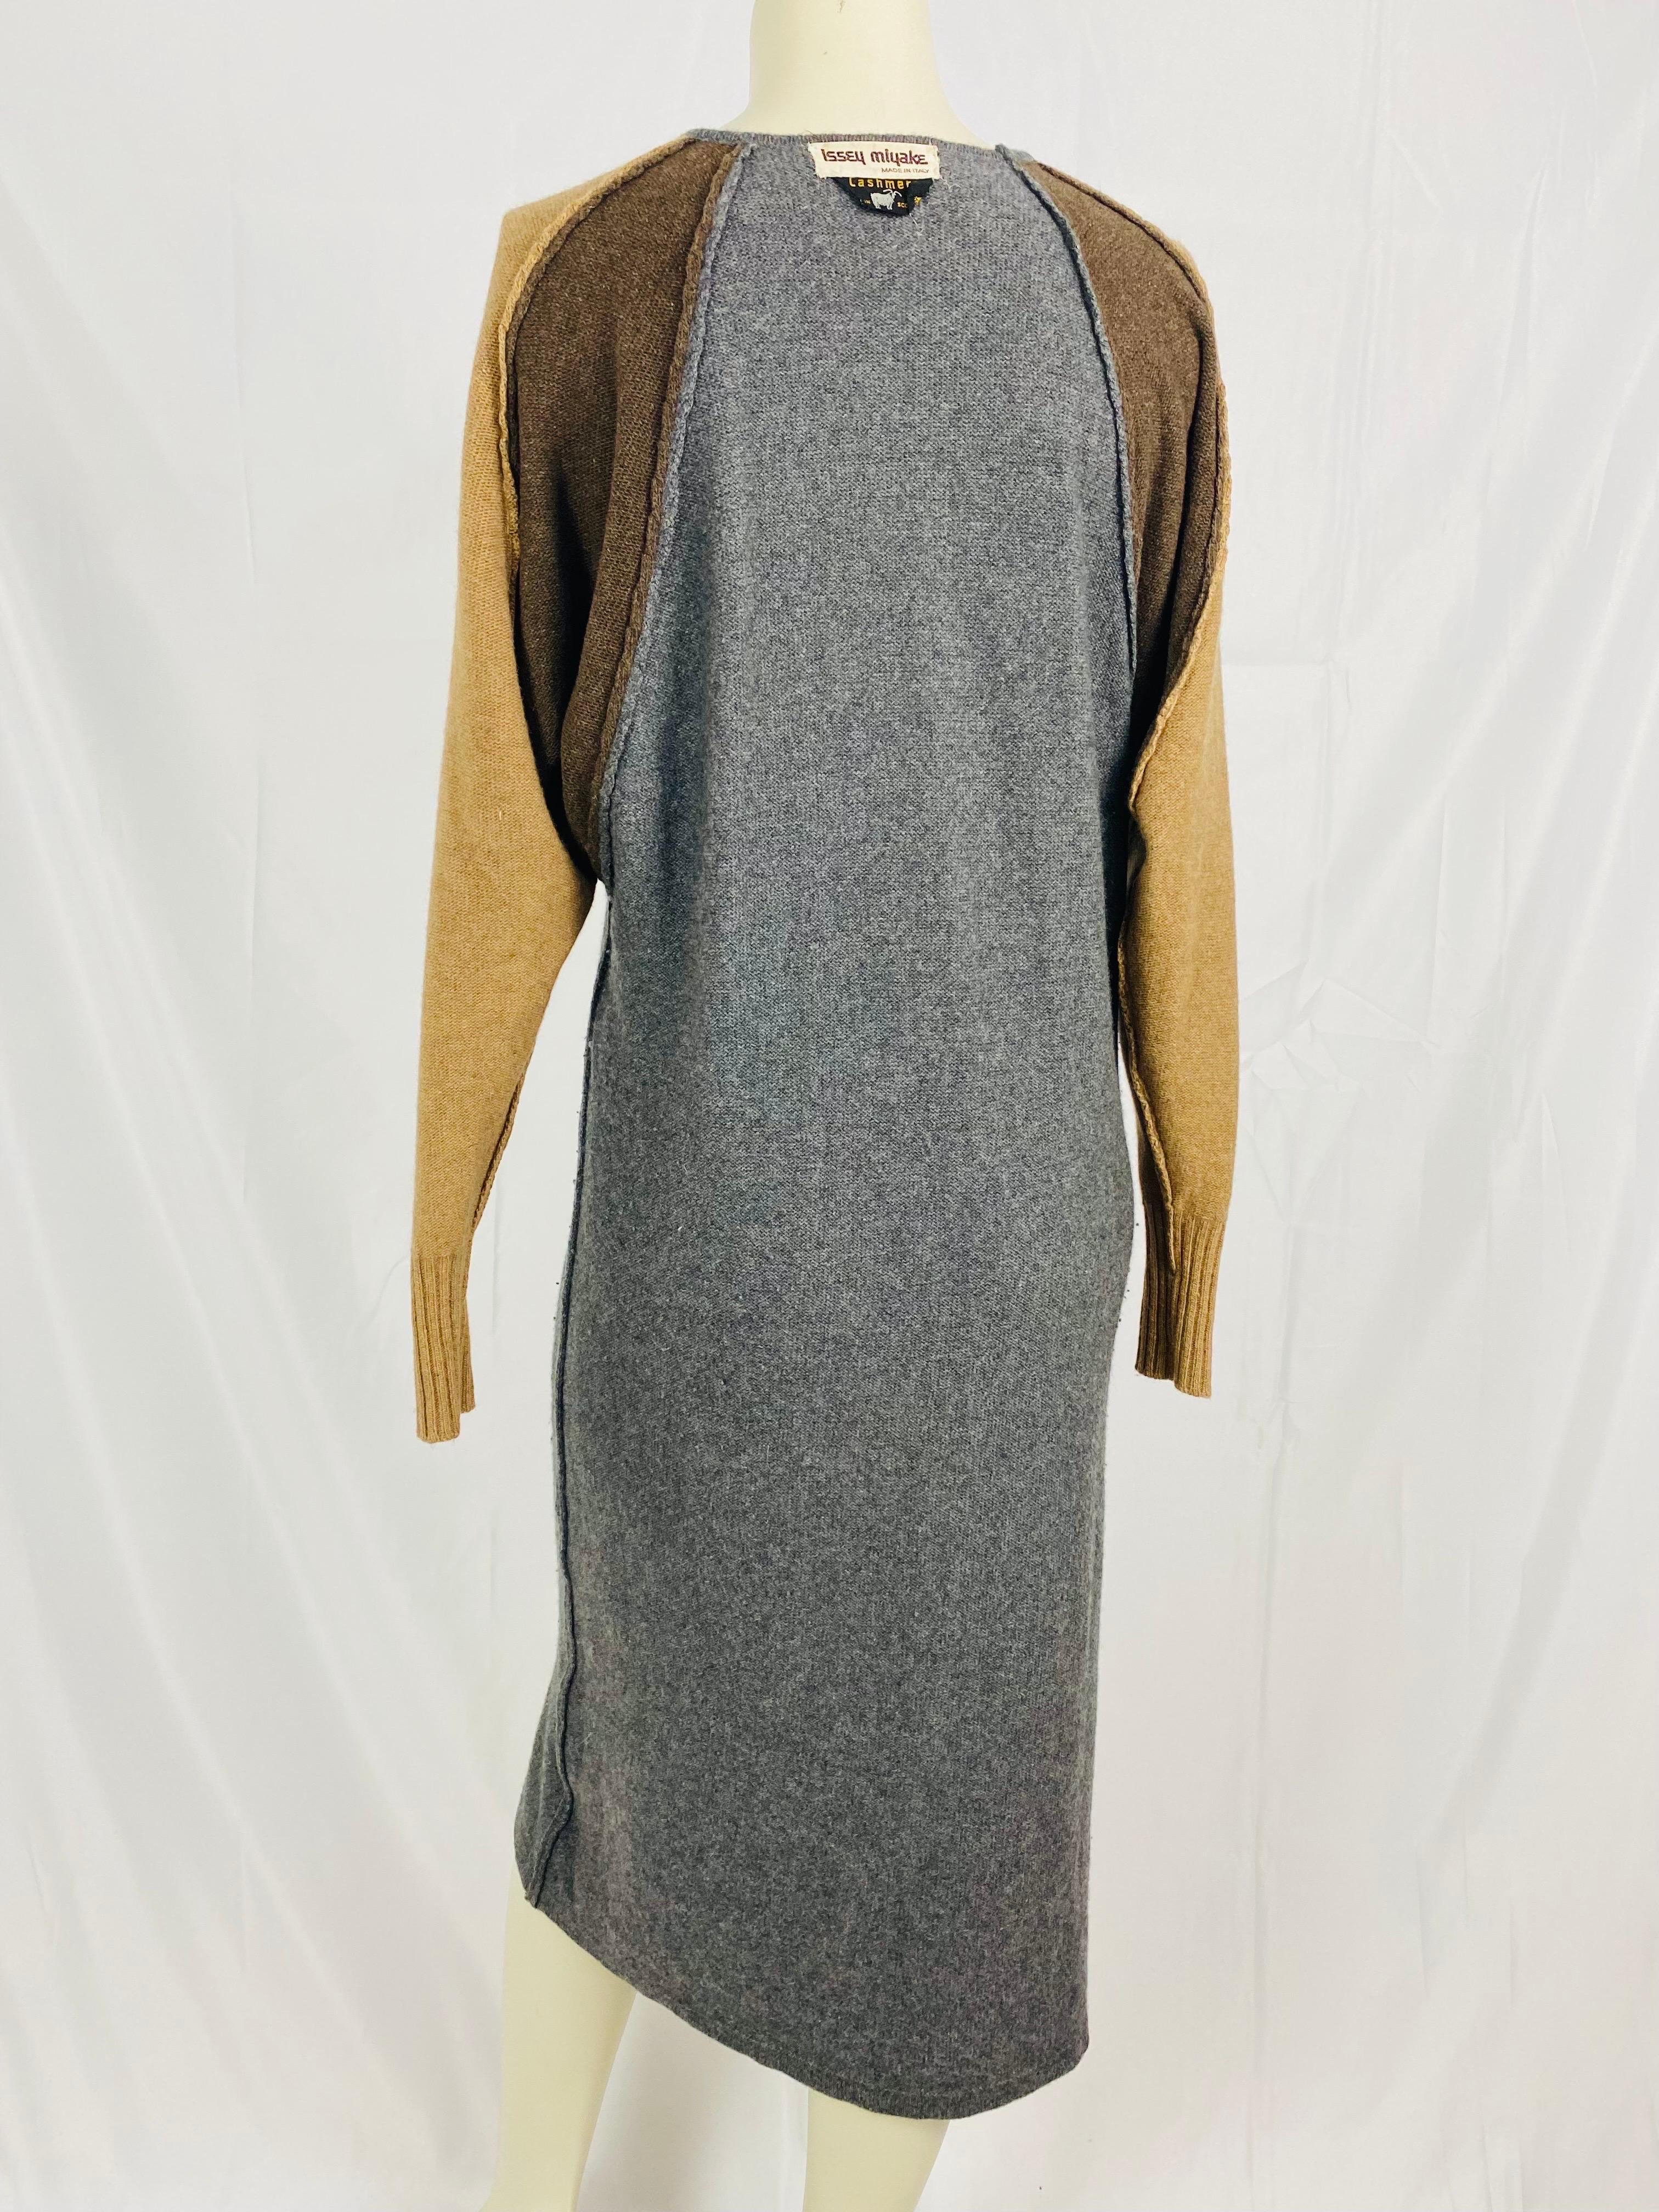 Vintage Issey Miyake cashmere sweater dress from 1980 For Sale 3